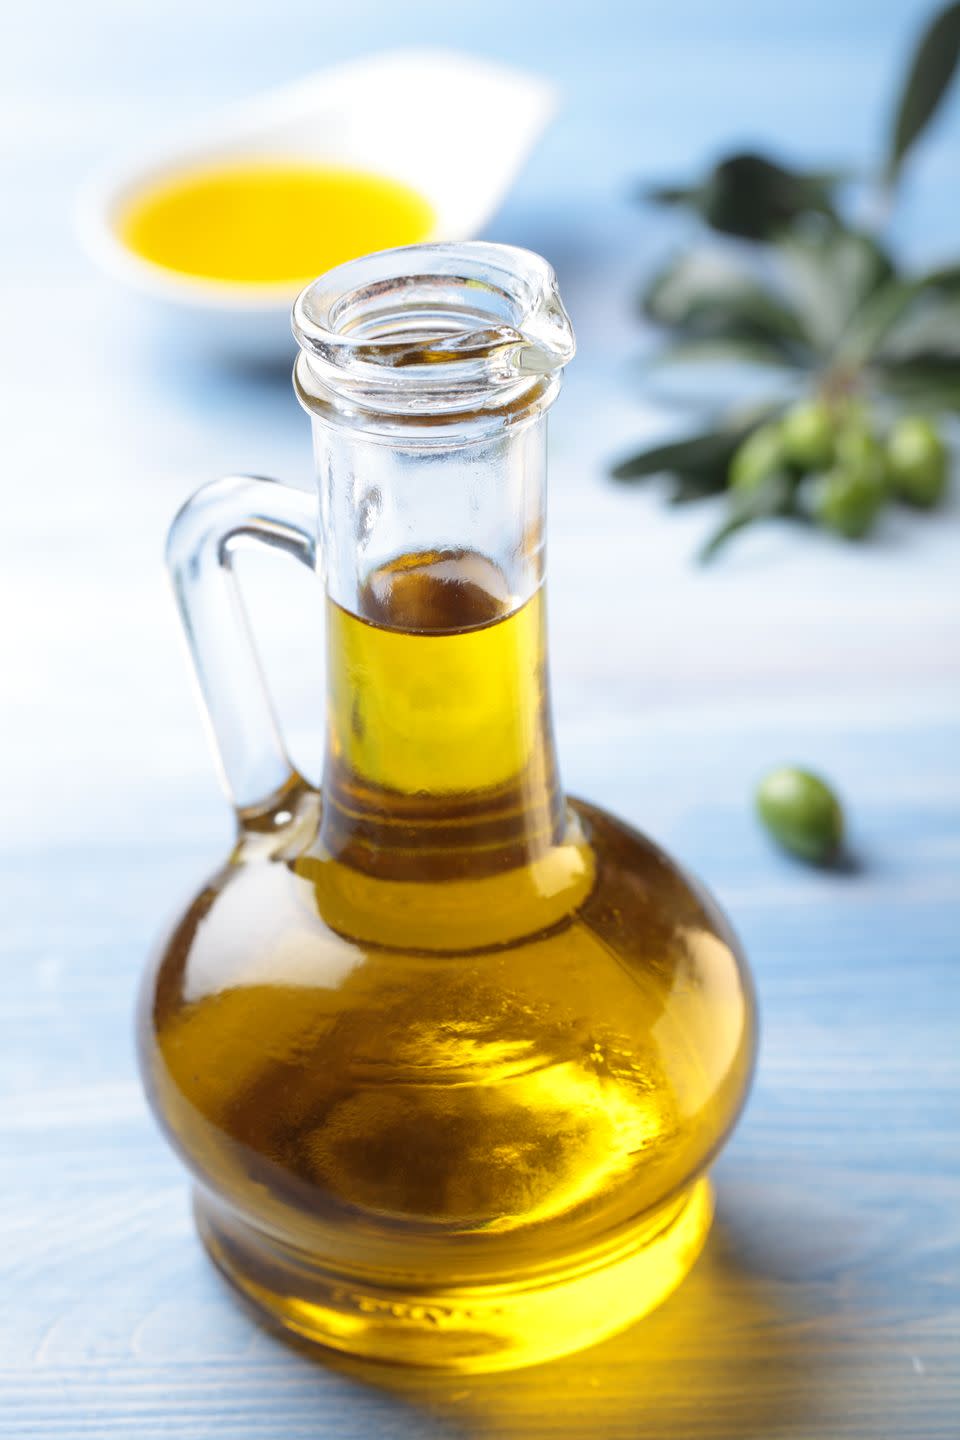 <p>Olive oil not labeled "extra-virgin" (sometimes be called "refined olive oil" or "light olive oil") is another healthy option. </p><p>Though the word "refined" doesn’t exactly have a great reputation in the nutrition world, in this case it’s a game-changer, says Lakatos Shames. While refining olive oil strips out some antioxidants, it also raises its smoke point. </p><p>Bonus perks: regular ol' olive oil is less expensive and has a more neutral flavor than EVOO.</p><p>Opt for light or refined olive oil for high-heat cooking like pan-frying.</p><p><em>Nutrition per tablespoon: 119 calories, 13.5 g fat (1.9 g saturated, 9.9 g monounsaturated, 1.4 g polyunsaturated), 0 mg sodium, 0 g carbs, 0 g sugar, 0 g fiber, 0 g protein</em></p>